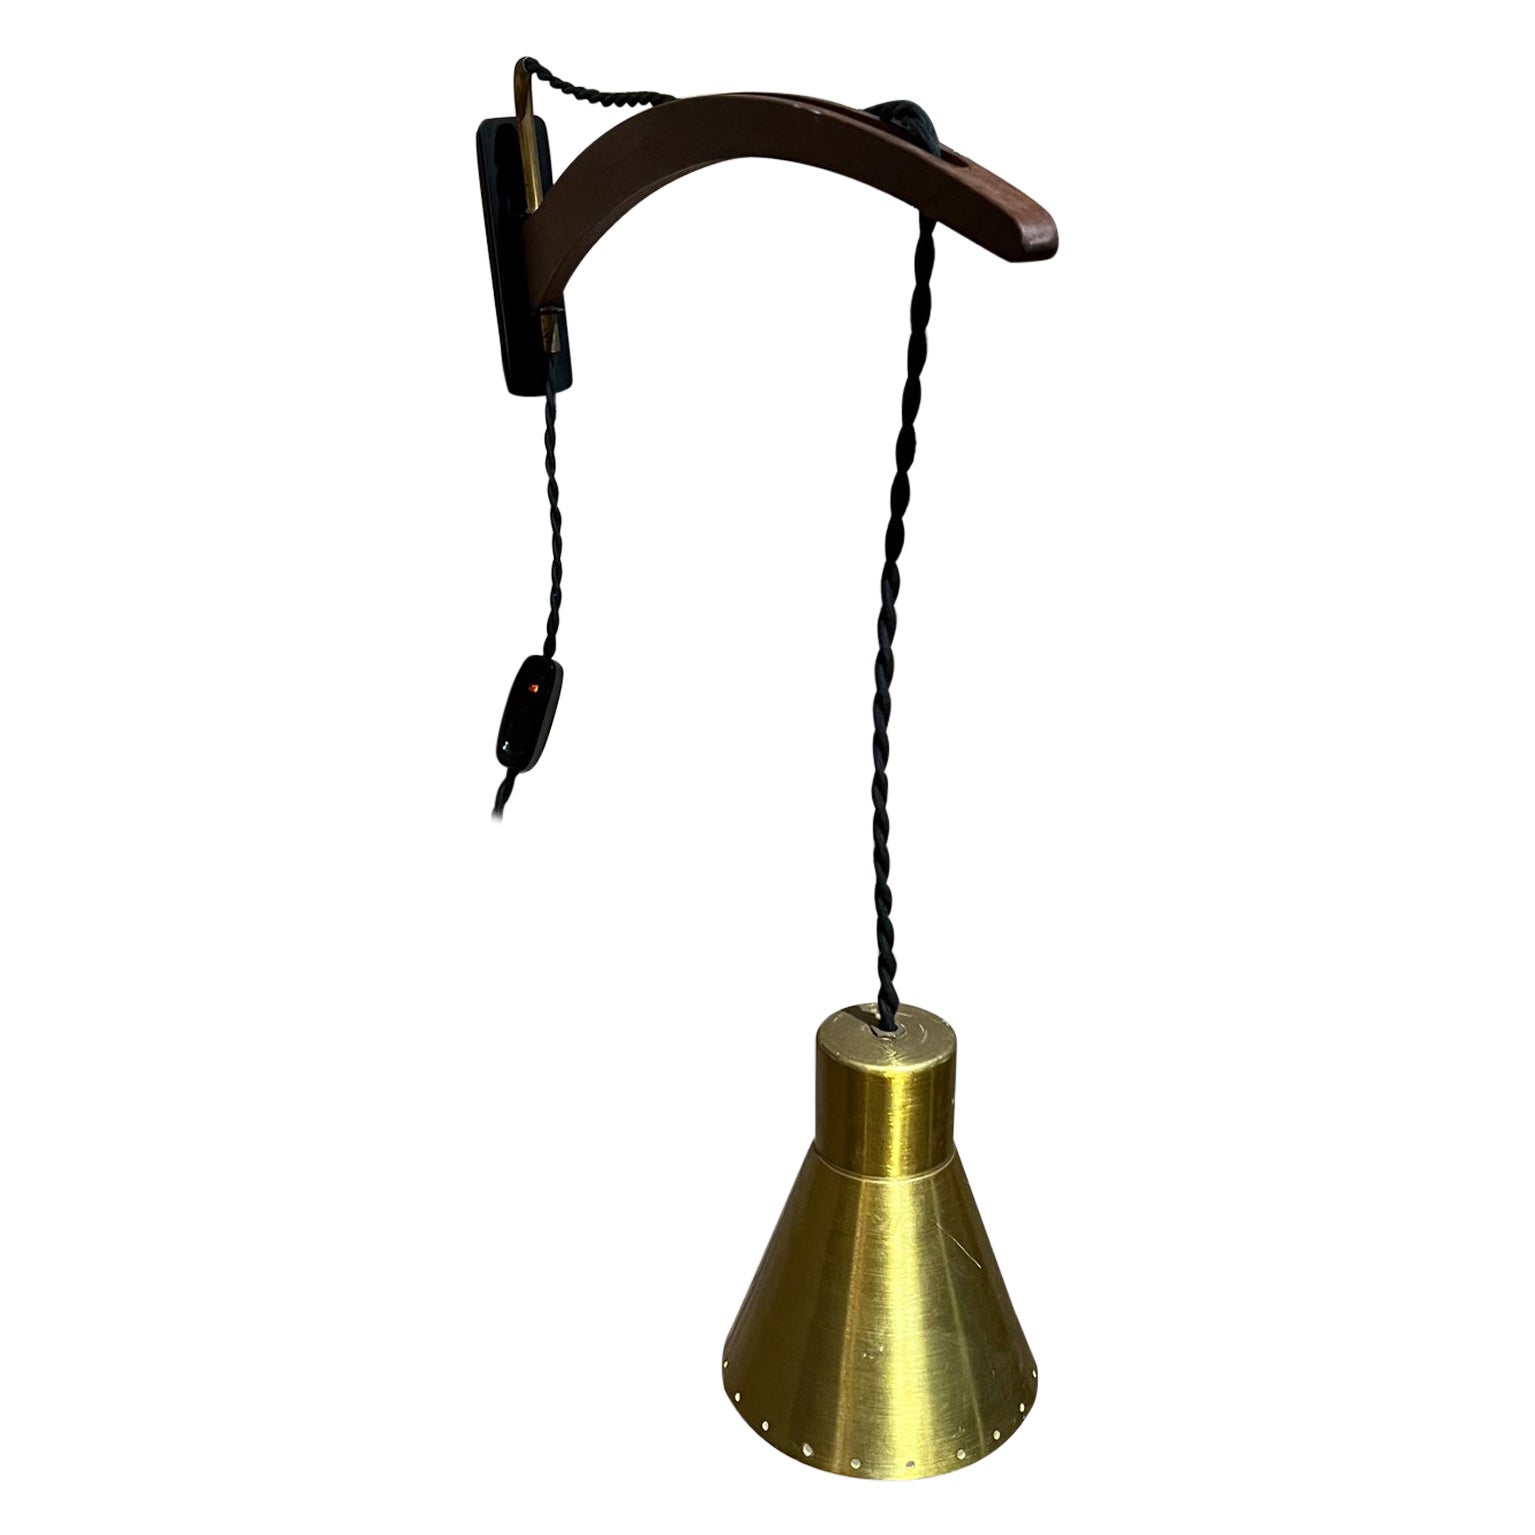 1950s Sculptural Sconce Gold Wall Lamp Adjustable Shade Style of Stilnovo Italy For Sale